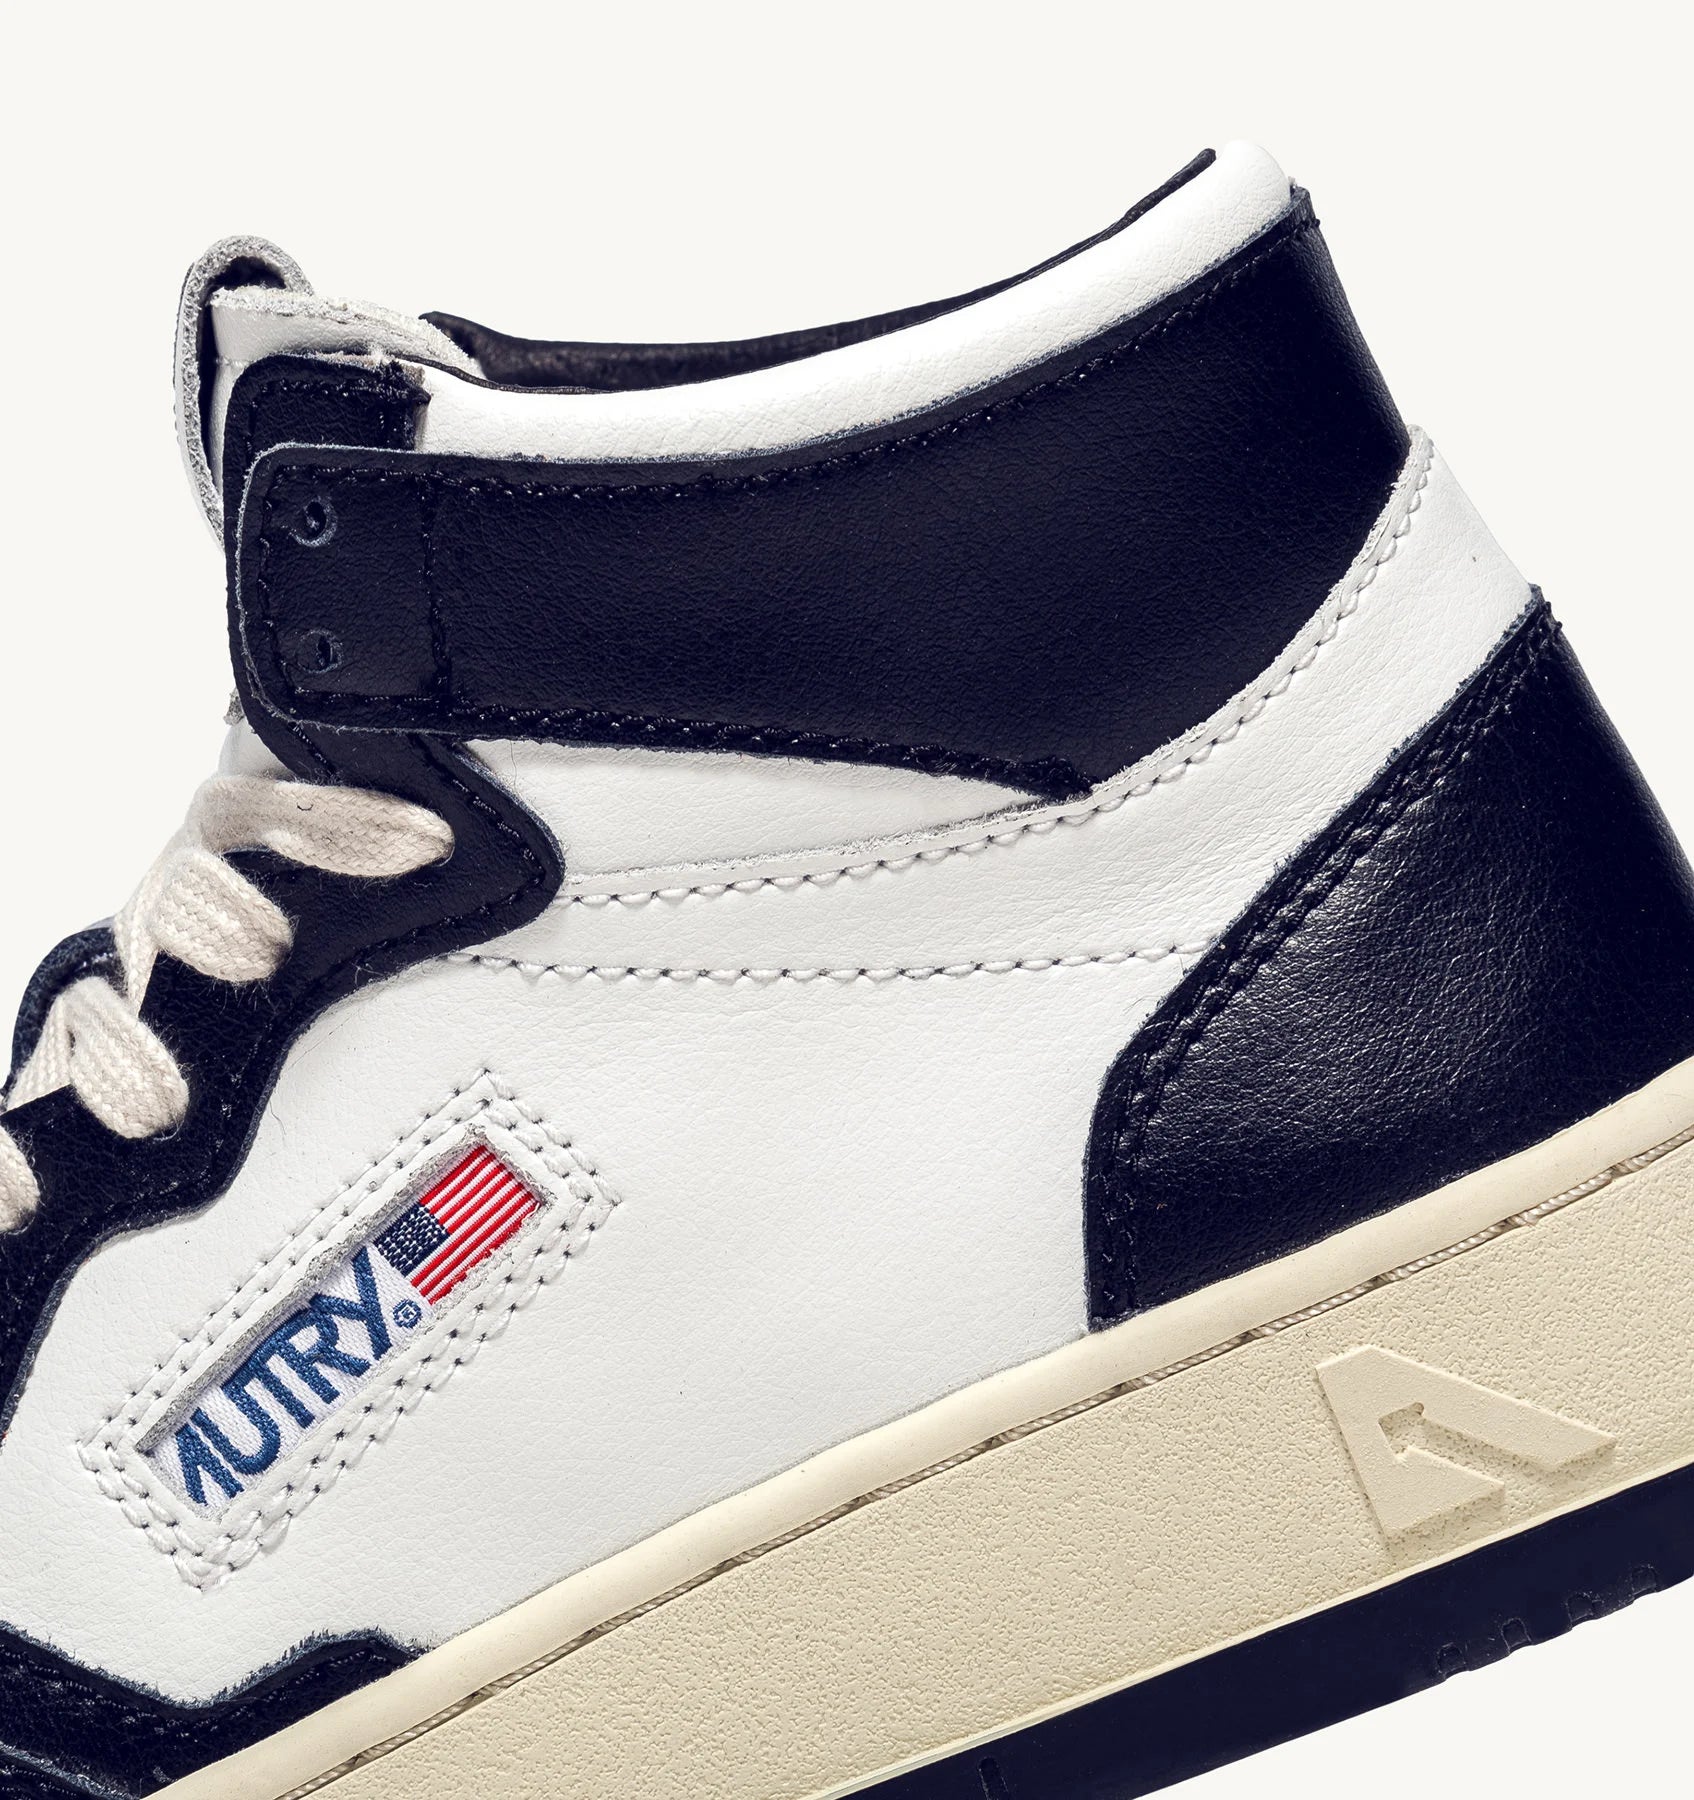 Autry Medalist Mid Sneakers in White And Blue Leather - Den Lille Ida - Autry